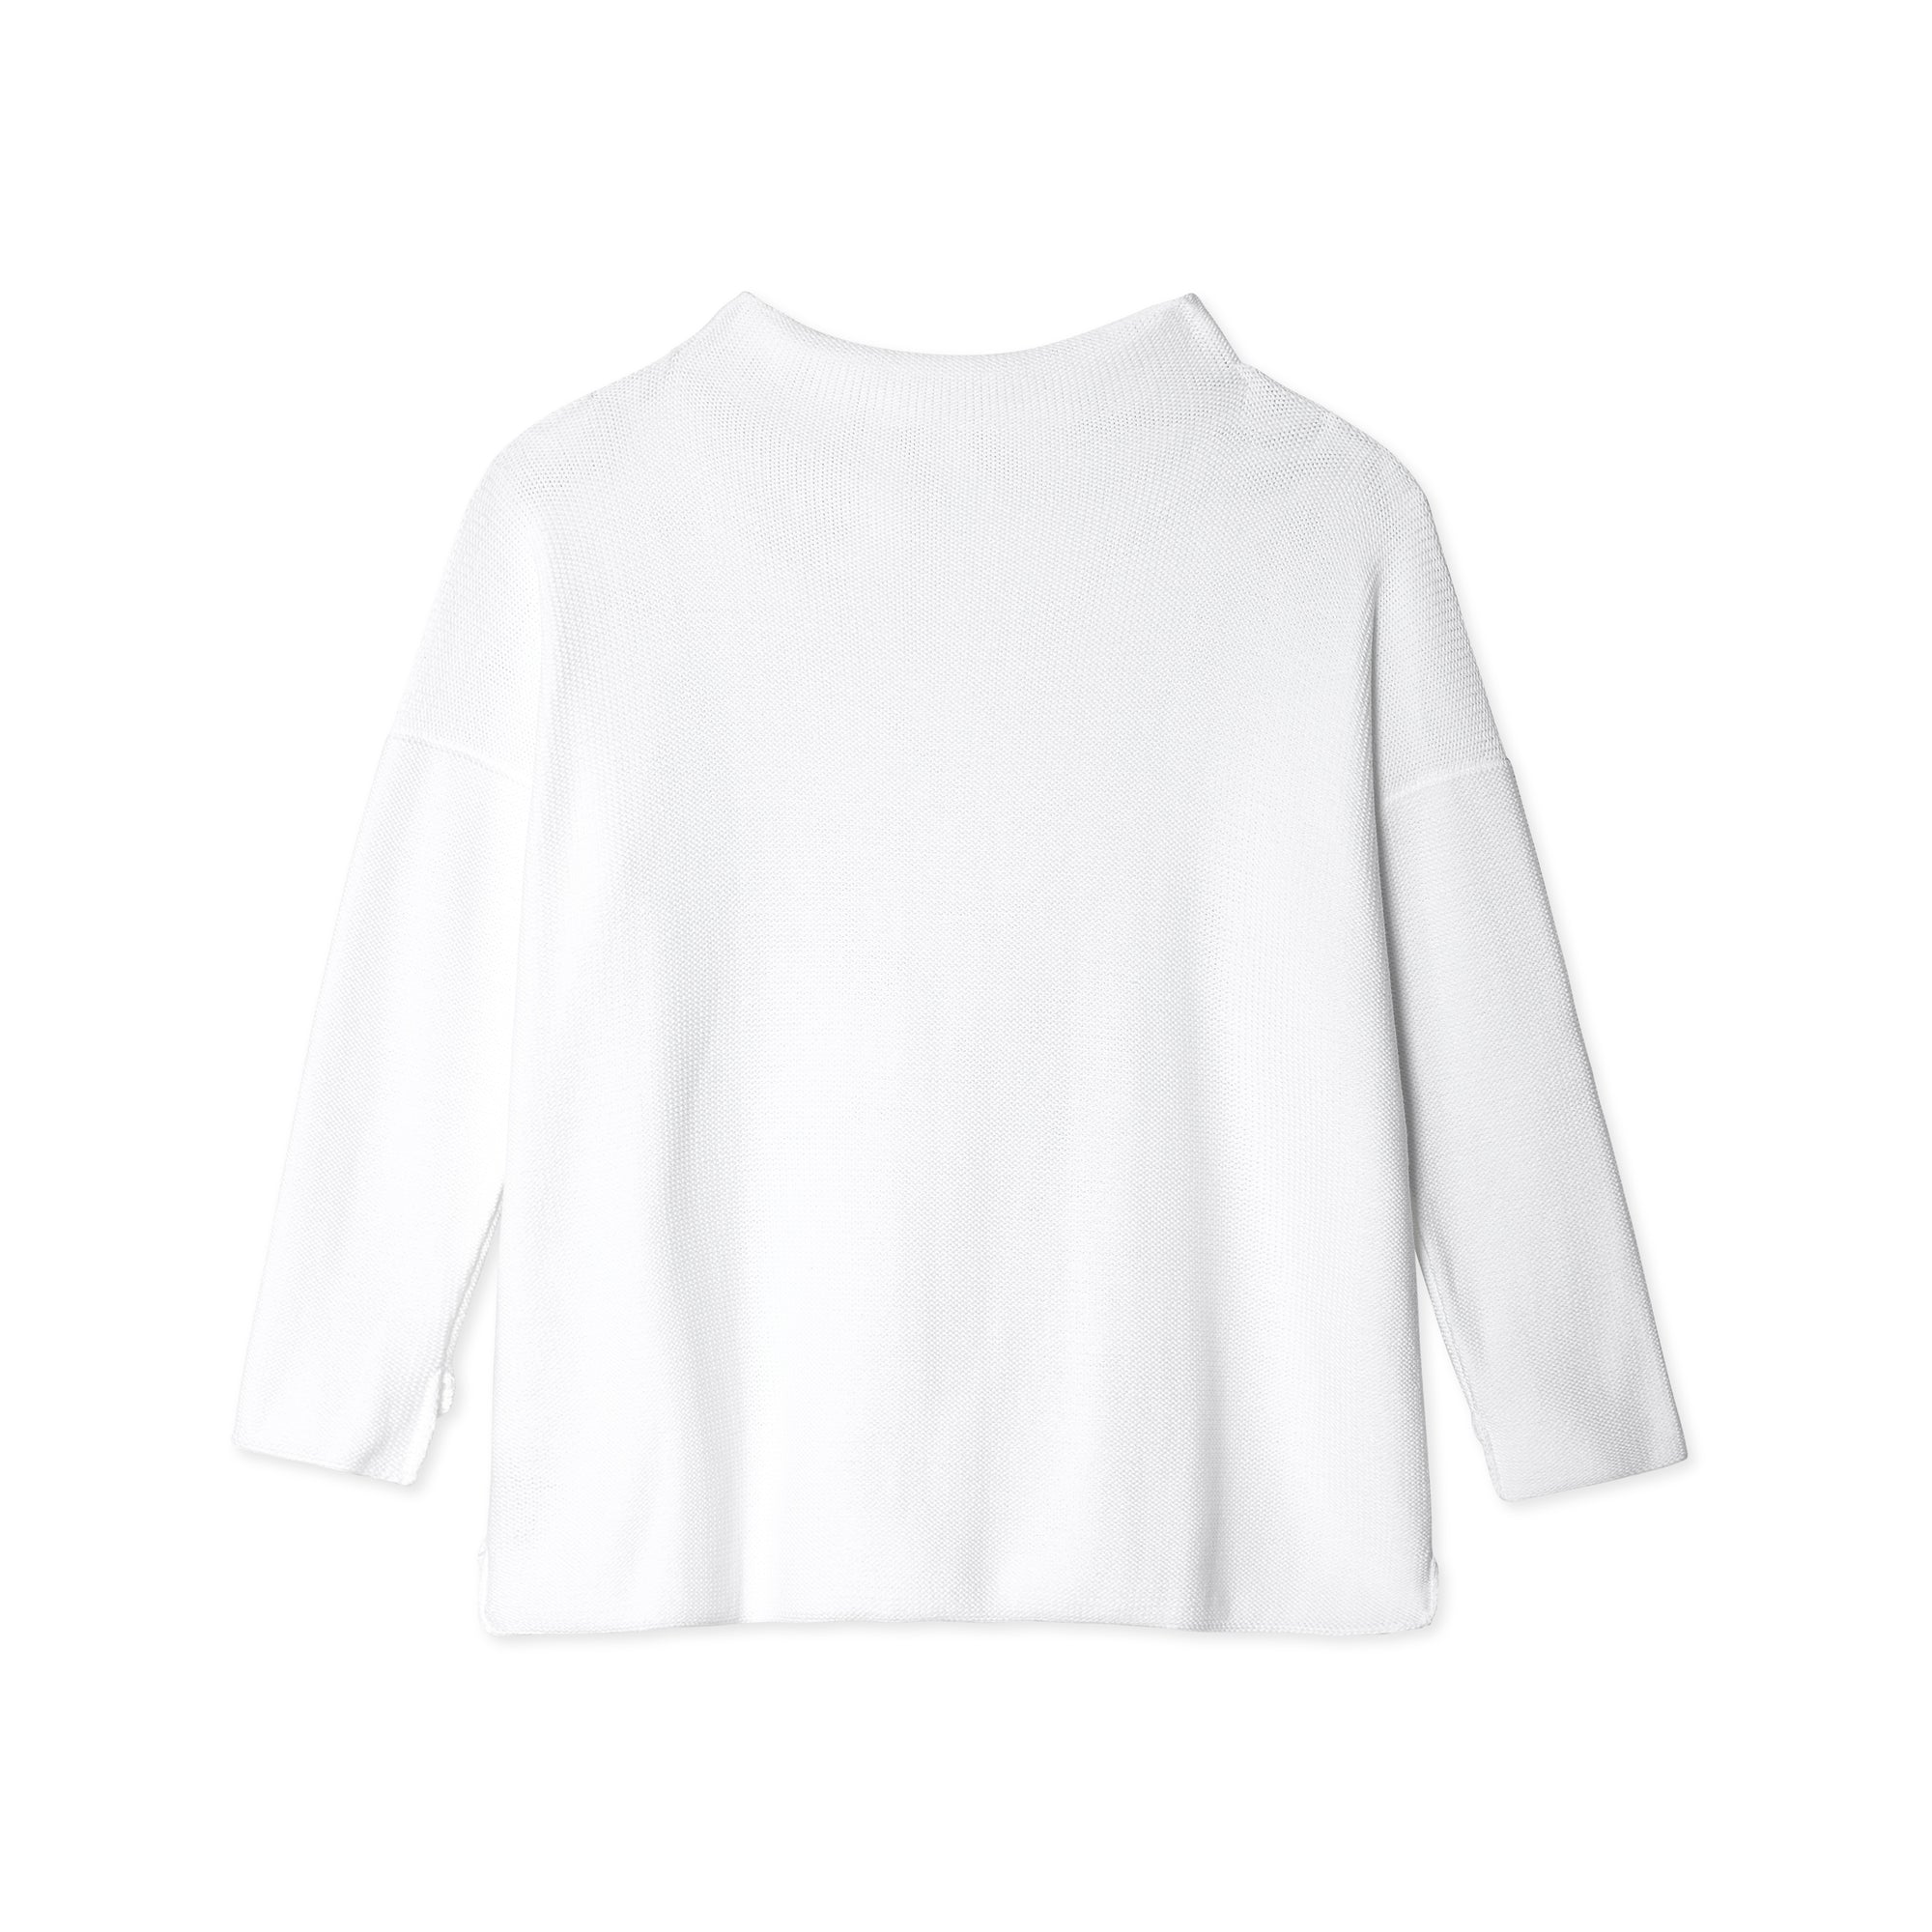 Daniela Gregis - Women’s Lupetto Knitted High Neck Sweater - (White) view 2